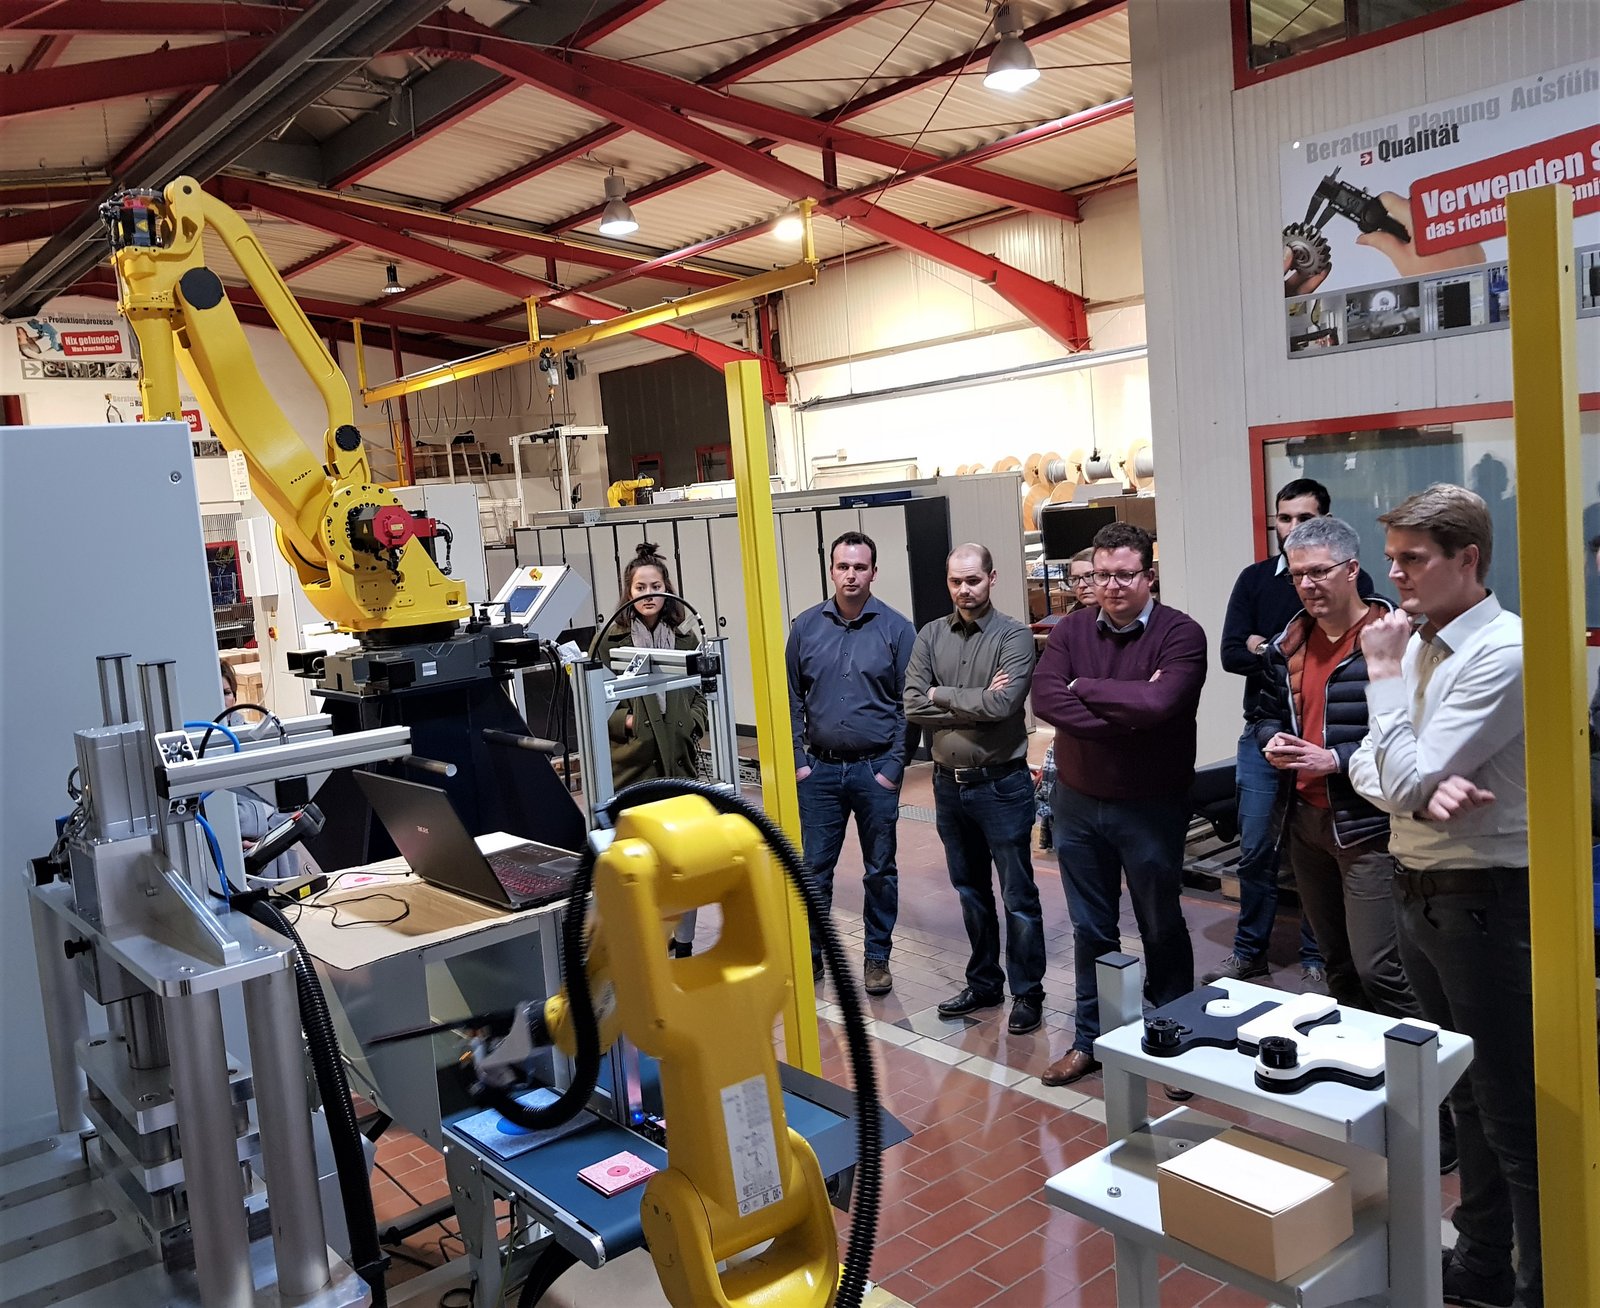 THE FAMILY COMPANIES inform themselves about the use of robotics